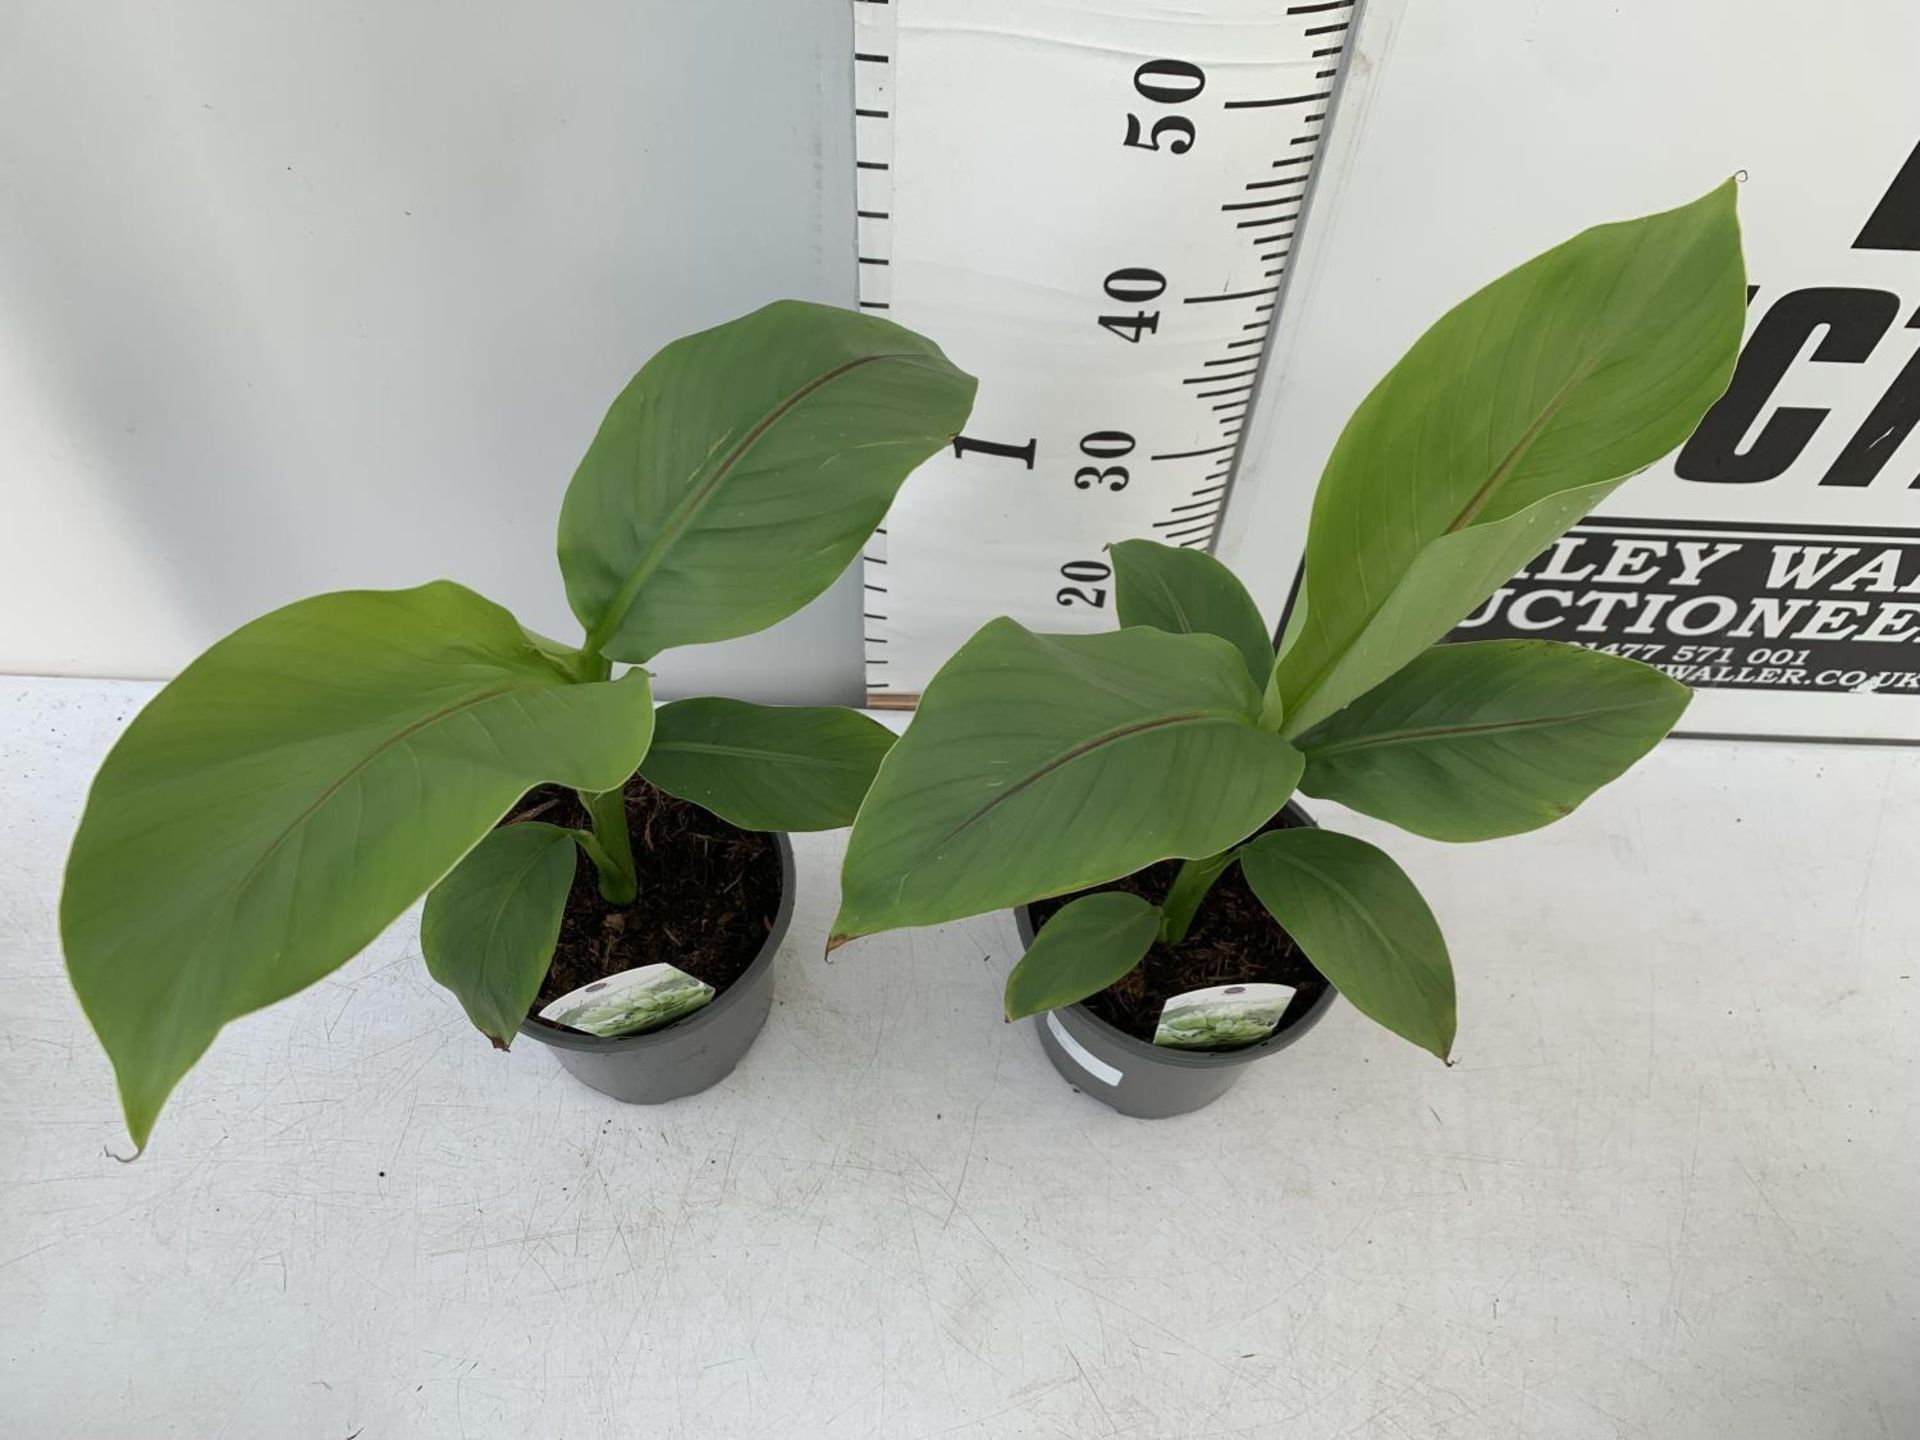 TWO MUSA BASJOO BANANA PLANTS IN 2 LTR POTS 45CM TALL TO BE SOLD FOR THE TWO NO VAT - Image 4 of 8